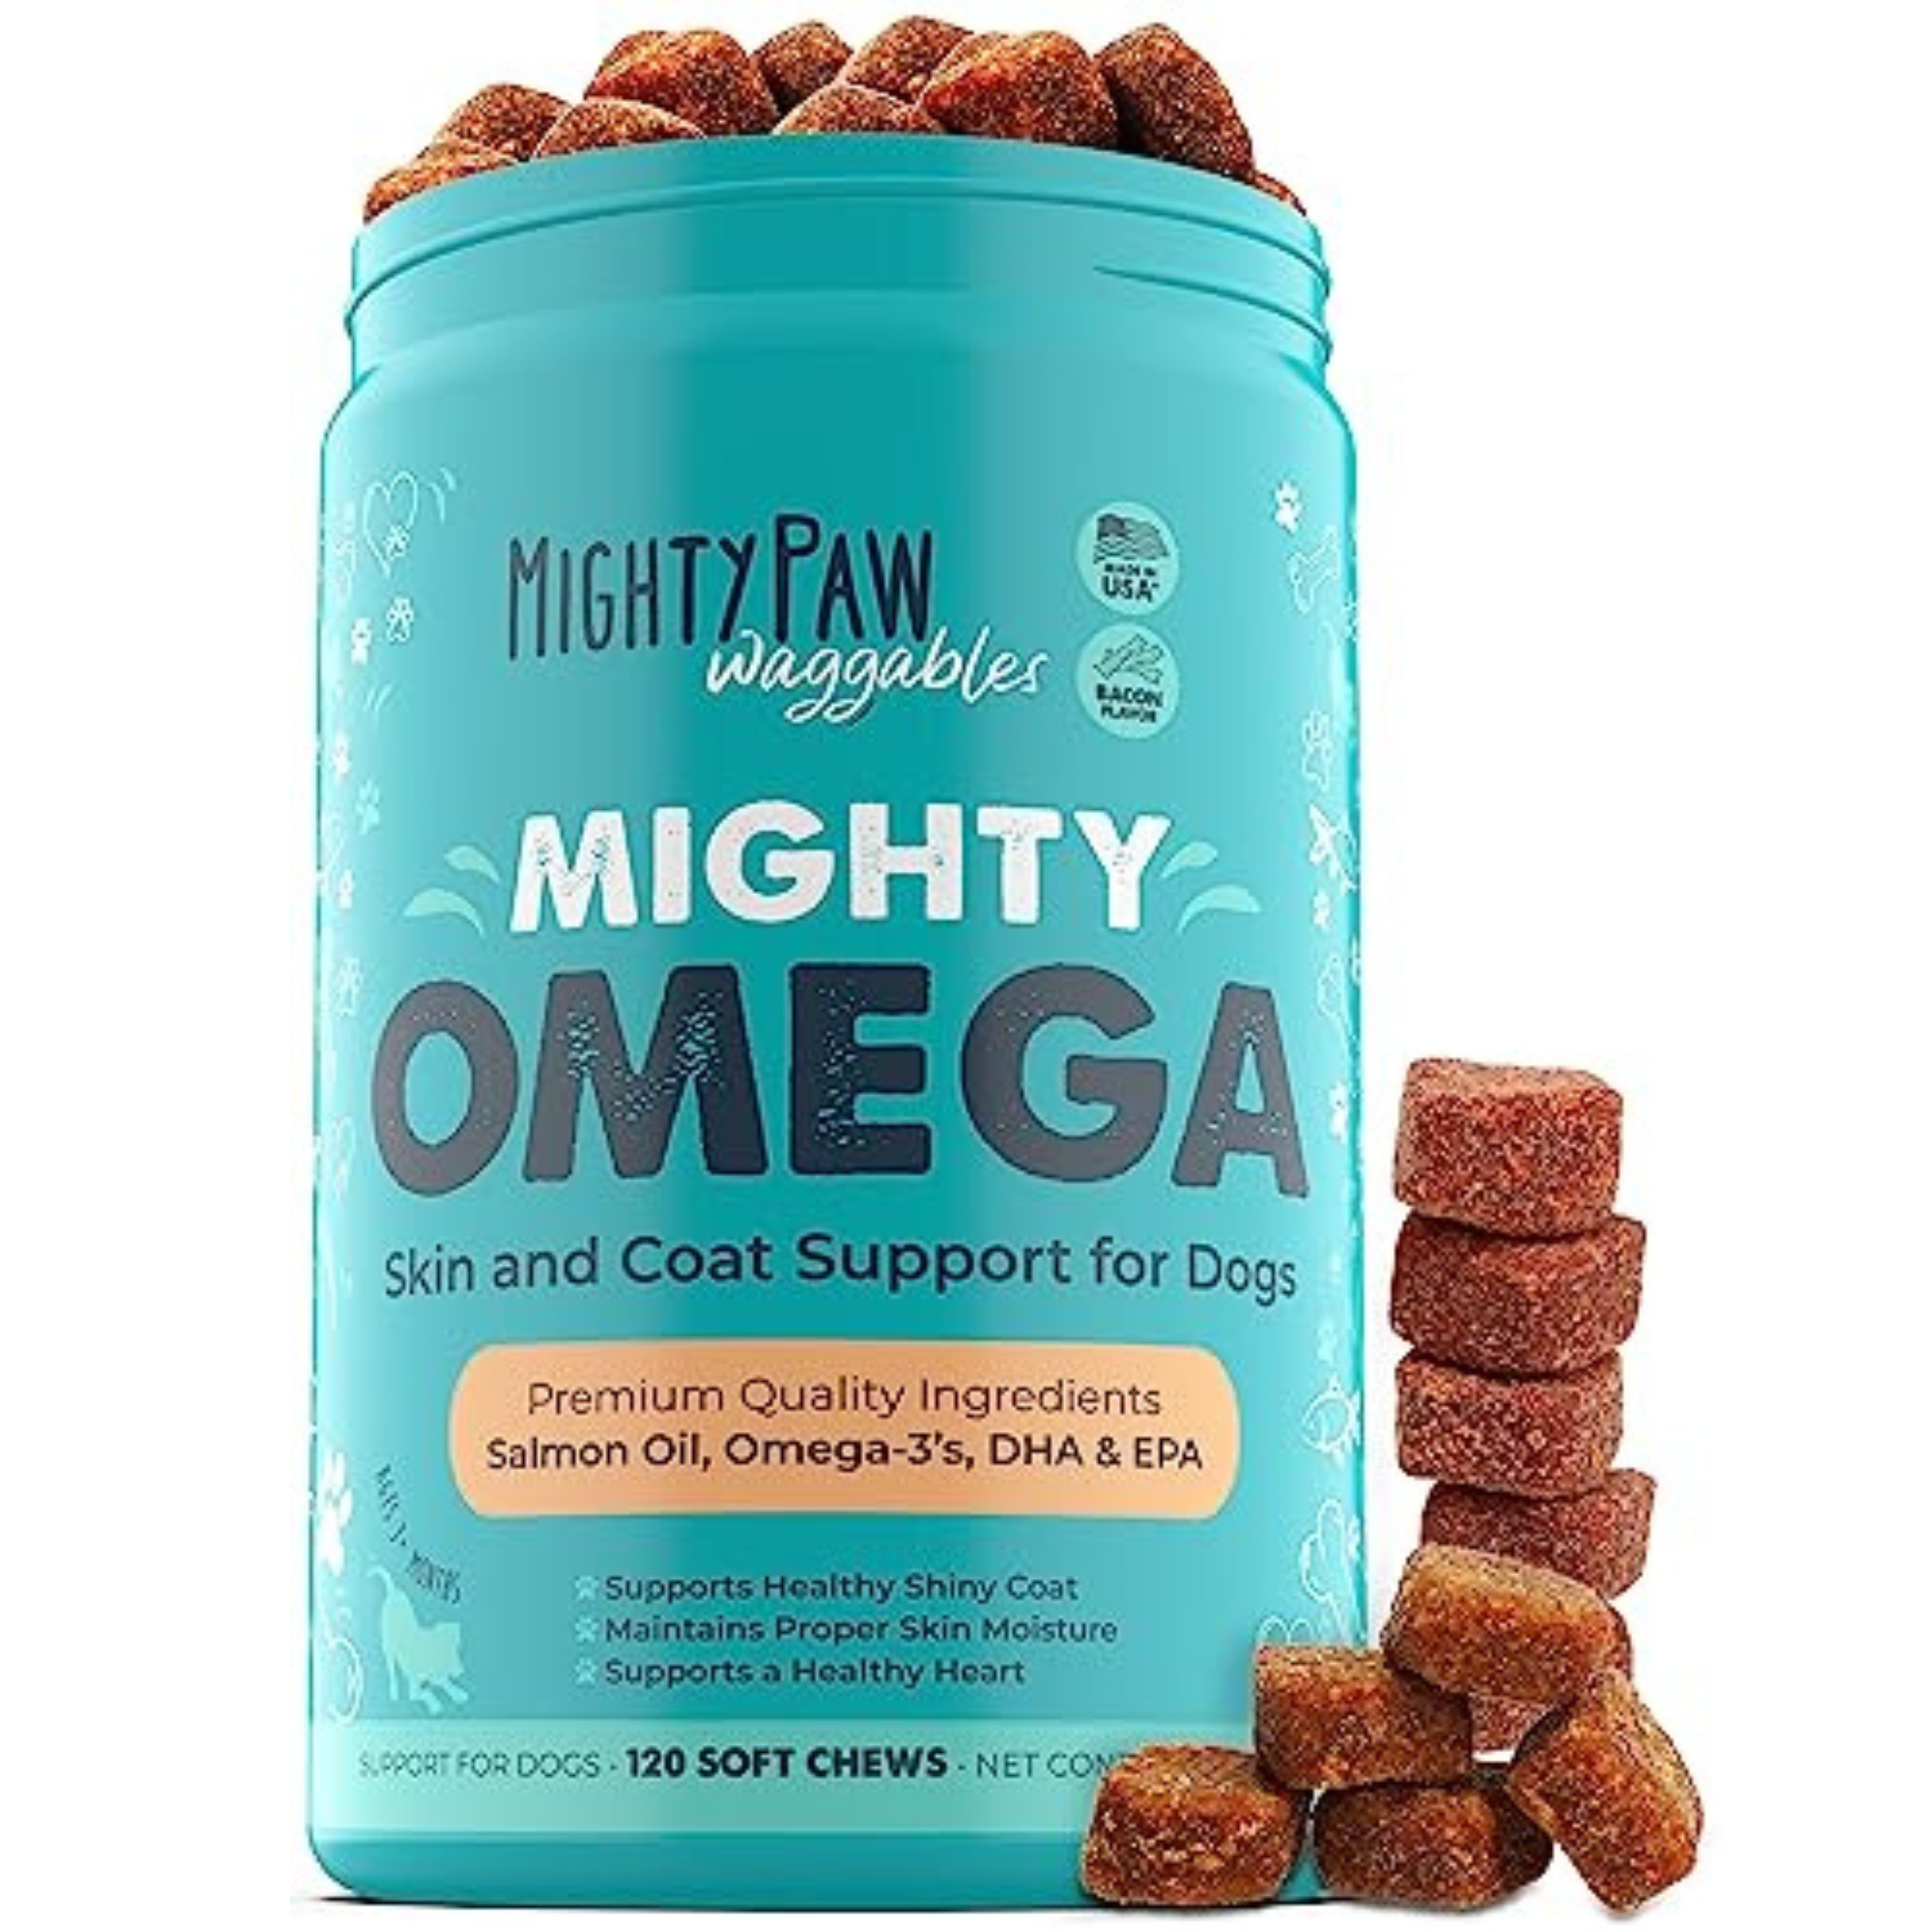 Mighty Omega Chews for Dogs